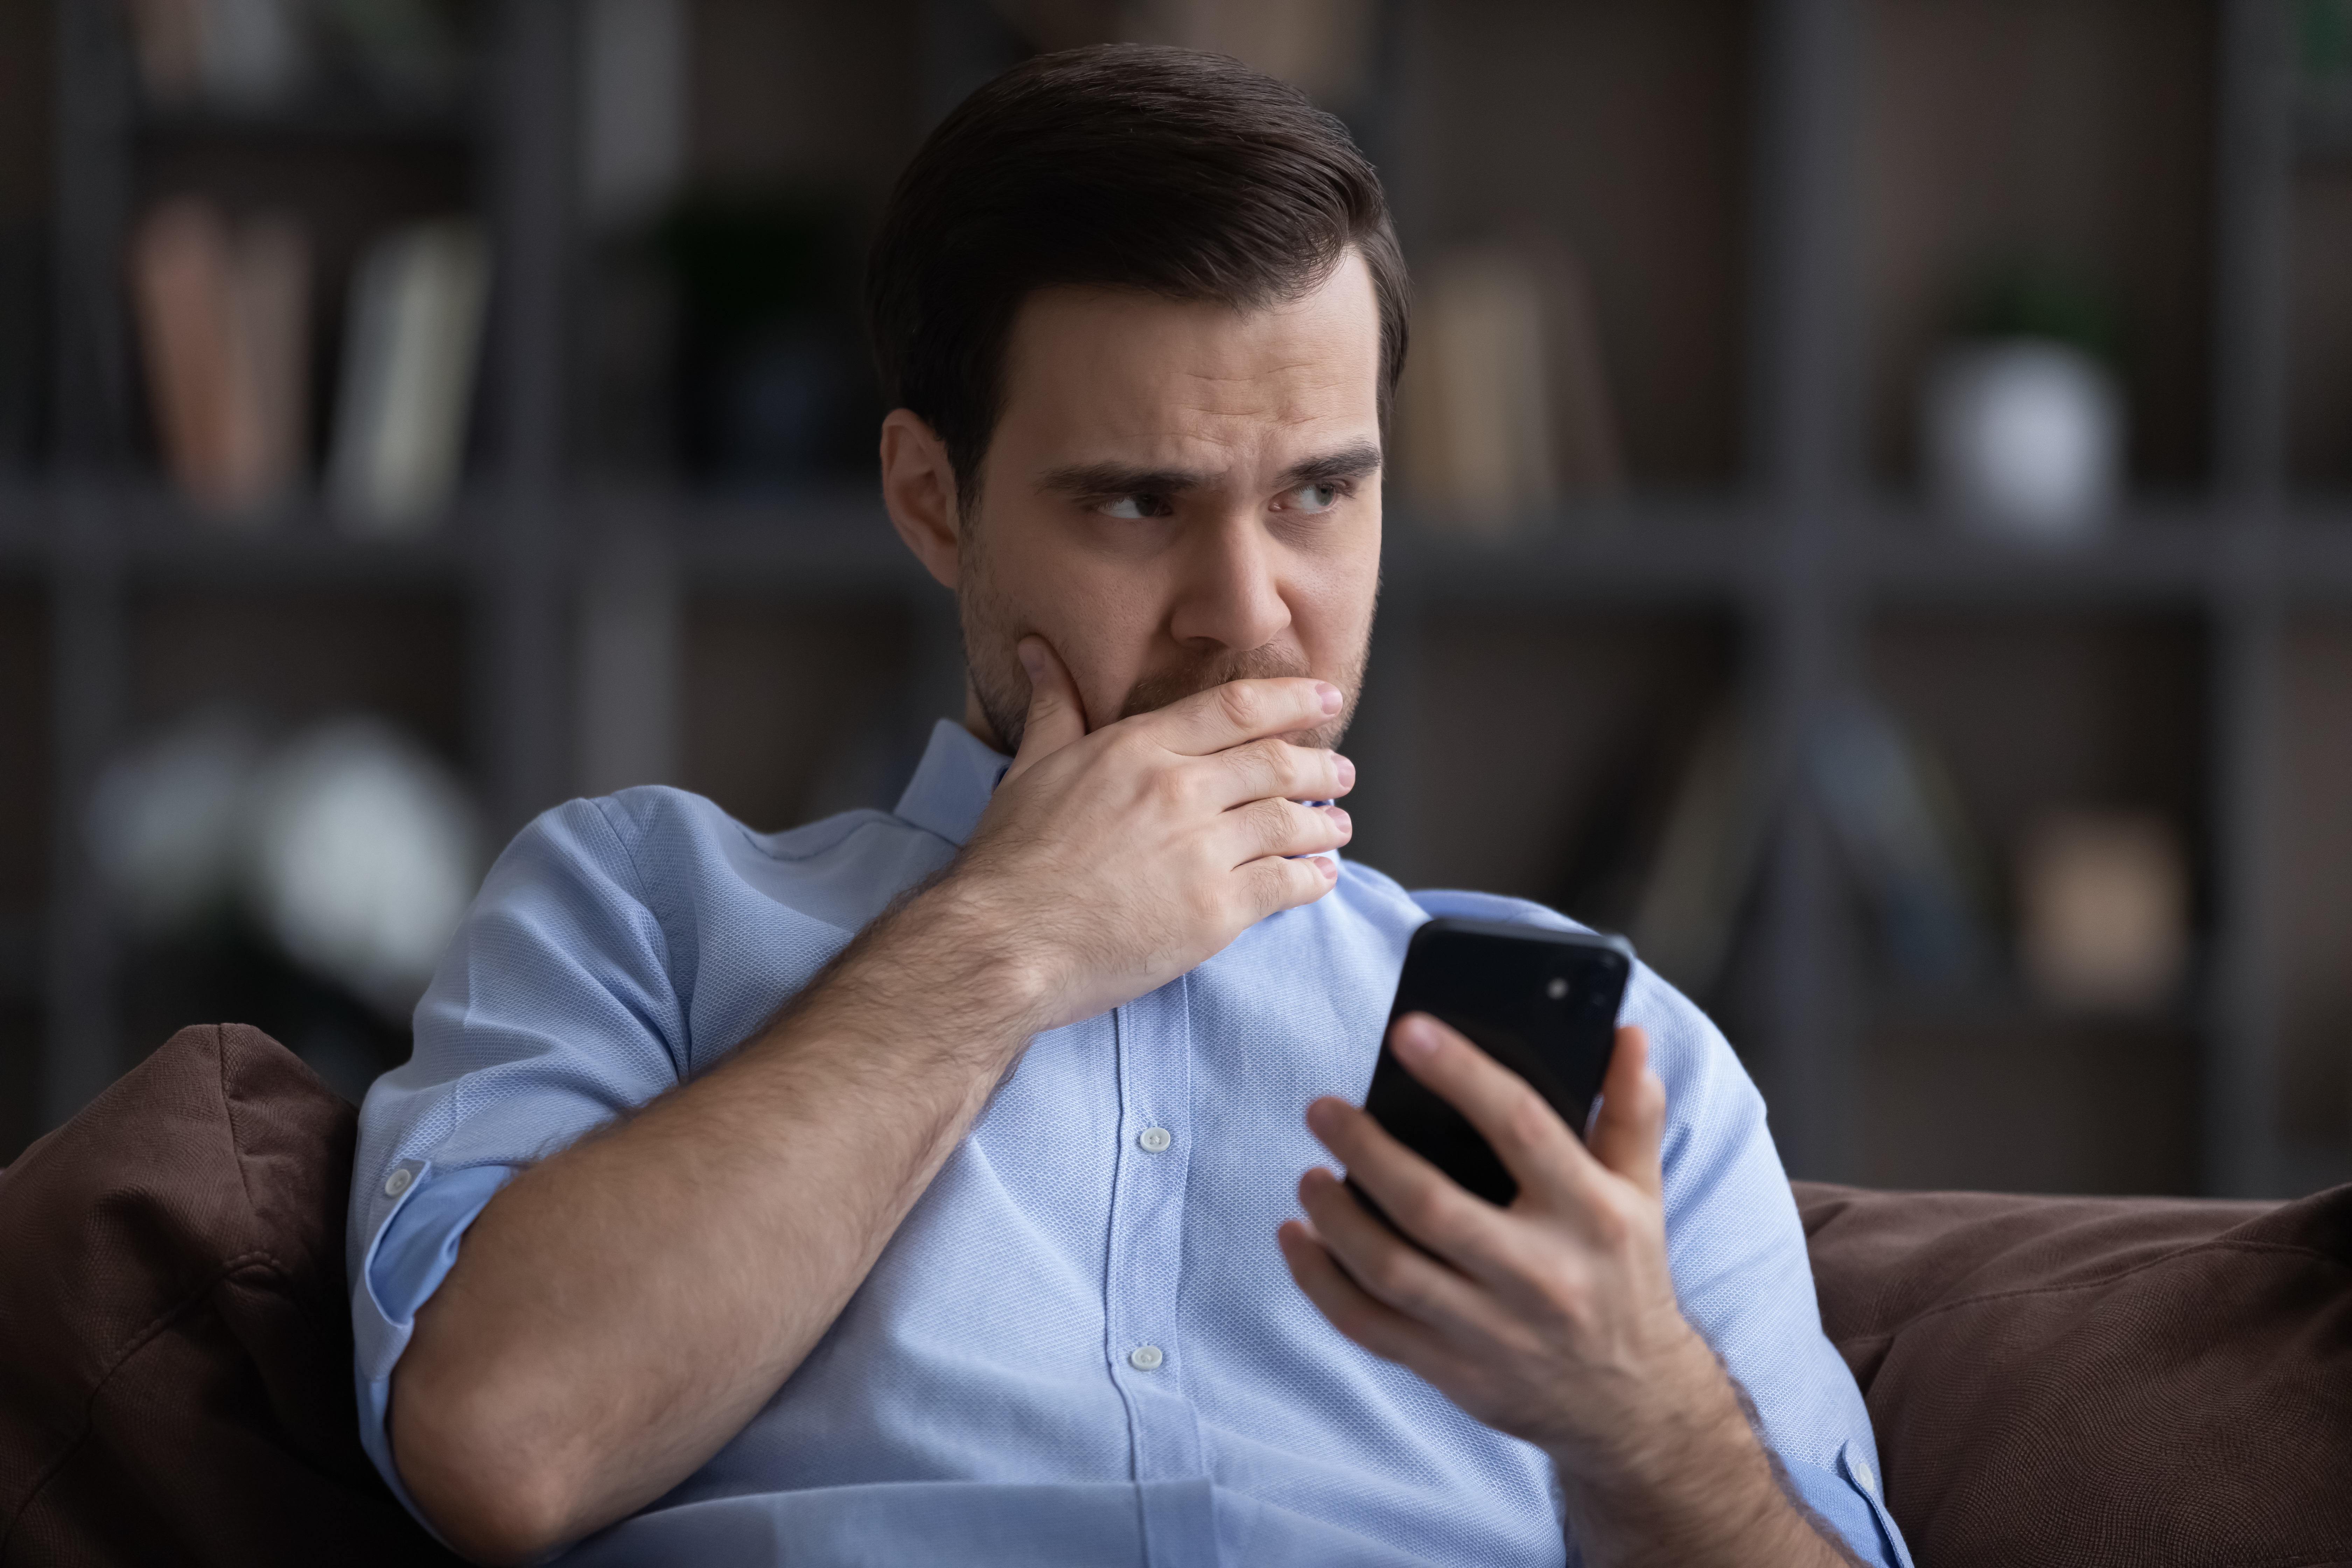 A distressed man holding a smartphone | Source: Shutterstock